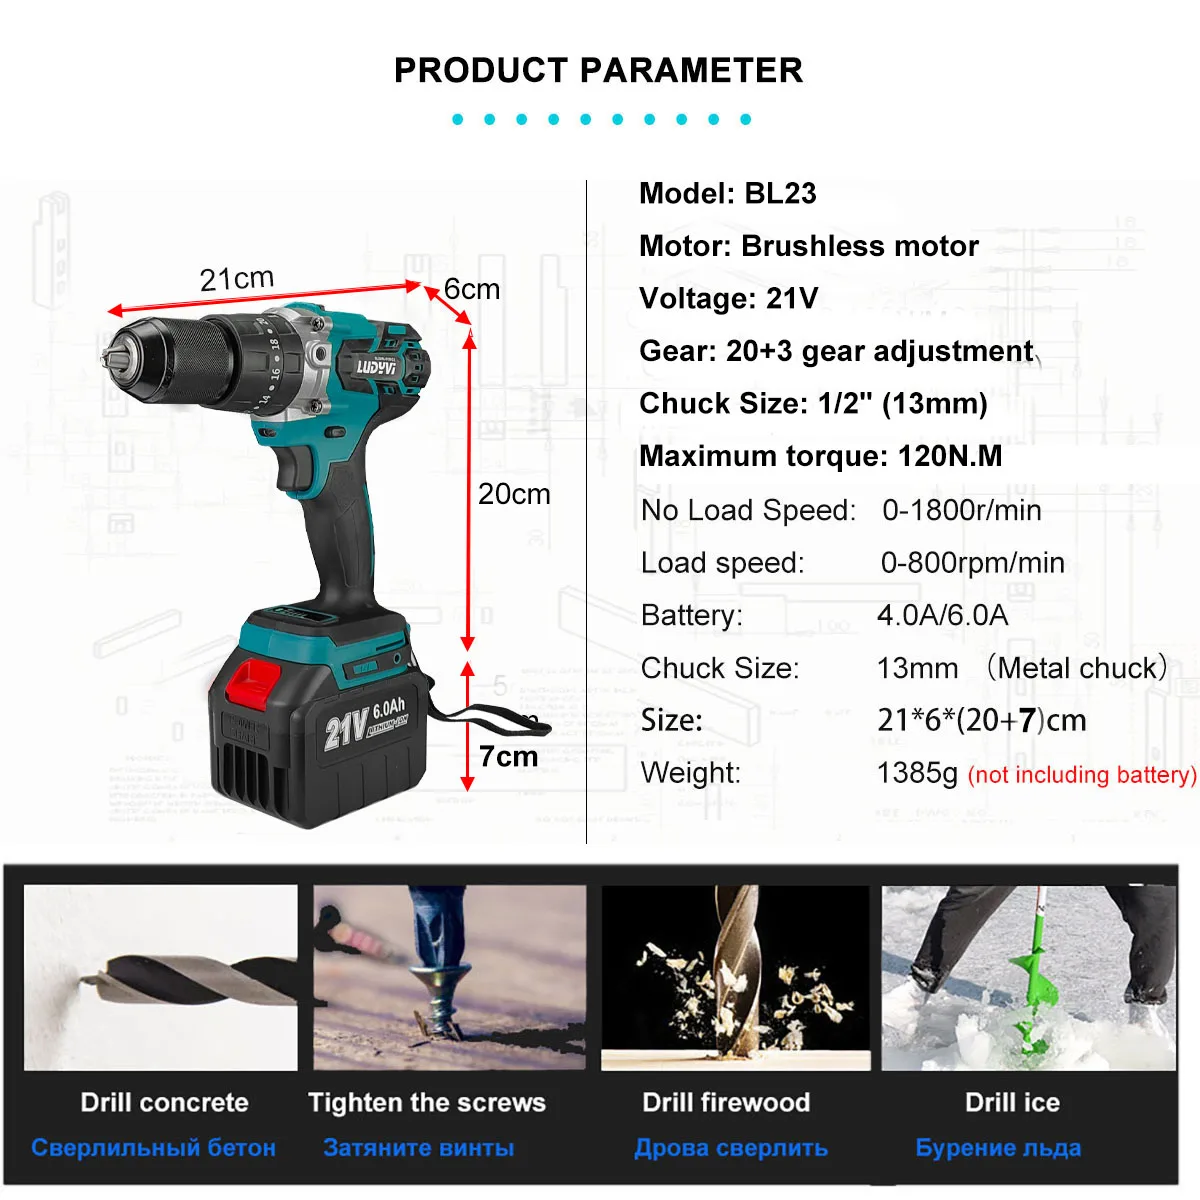 21V-13MM-Brushless-Electric-Drill-120N-M-4000mah-Battery-Cordless-Screwdriver-With-Impact-Function-Can-Drill-1.webp